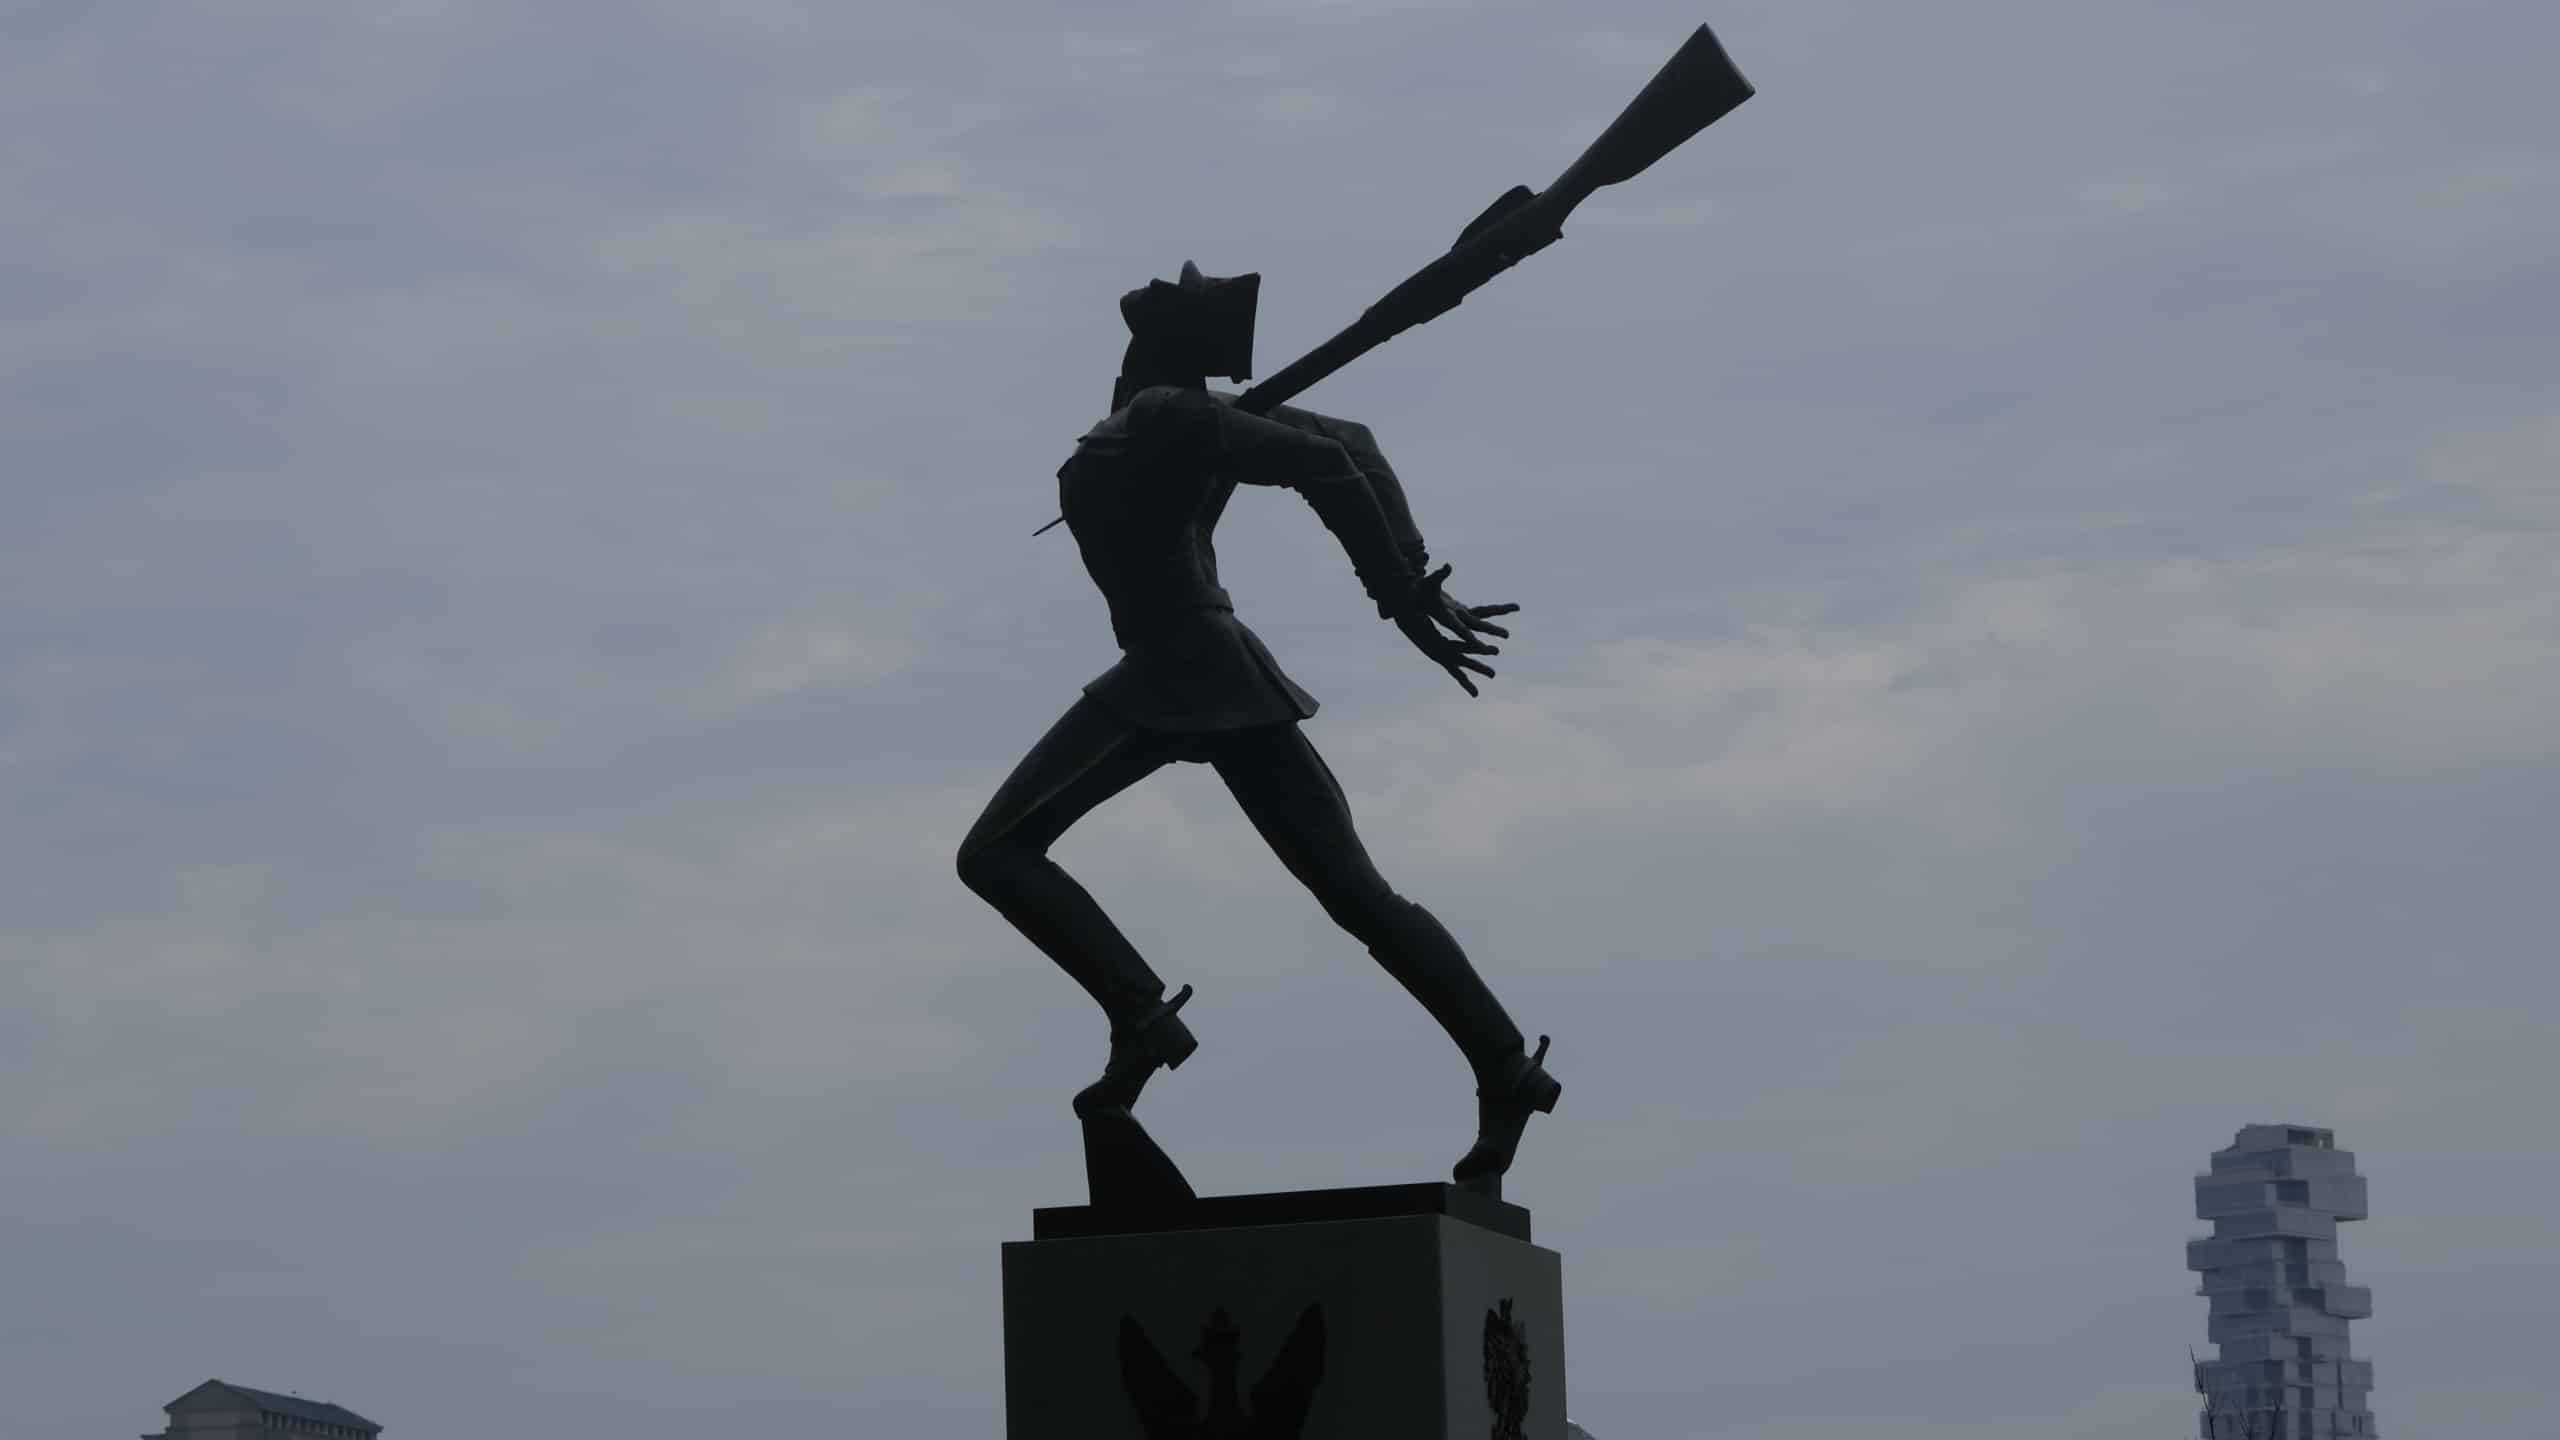 The Katyn Monument is About More Than Katyn